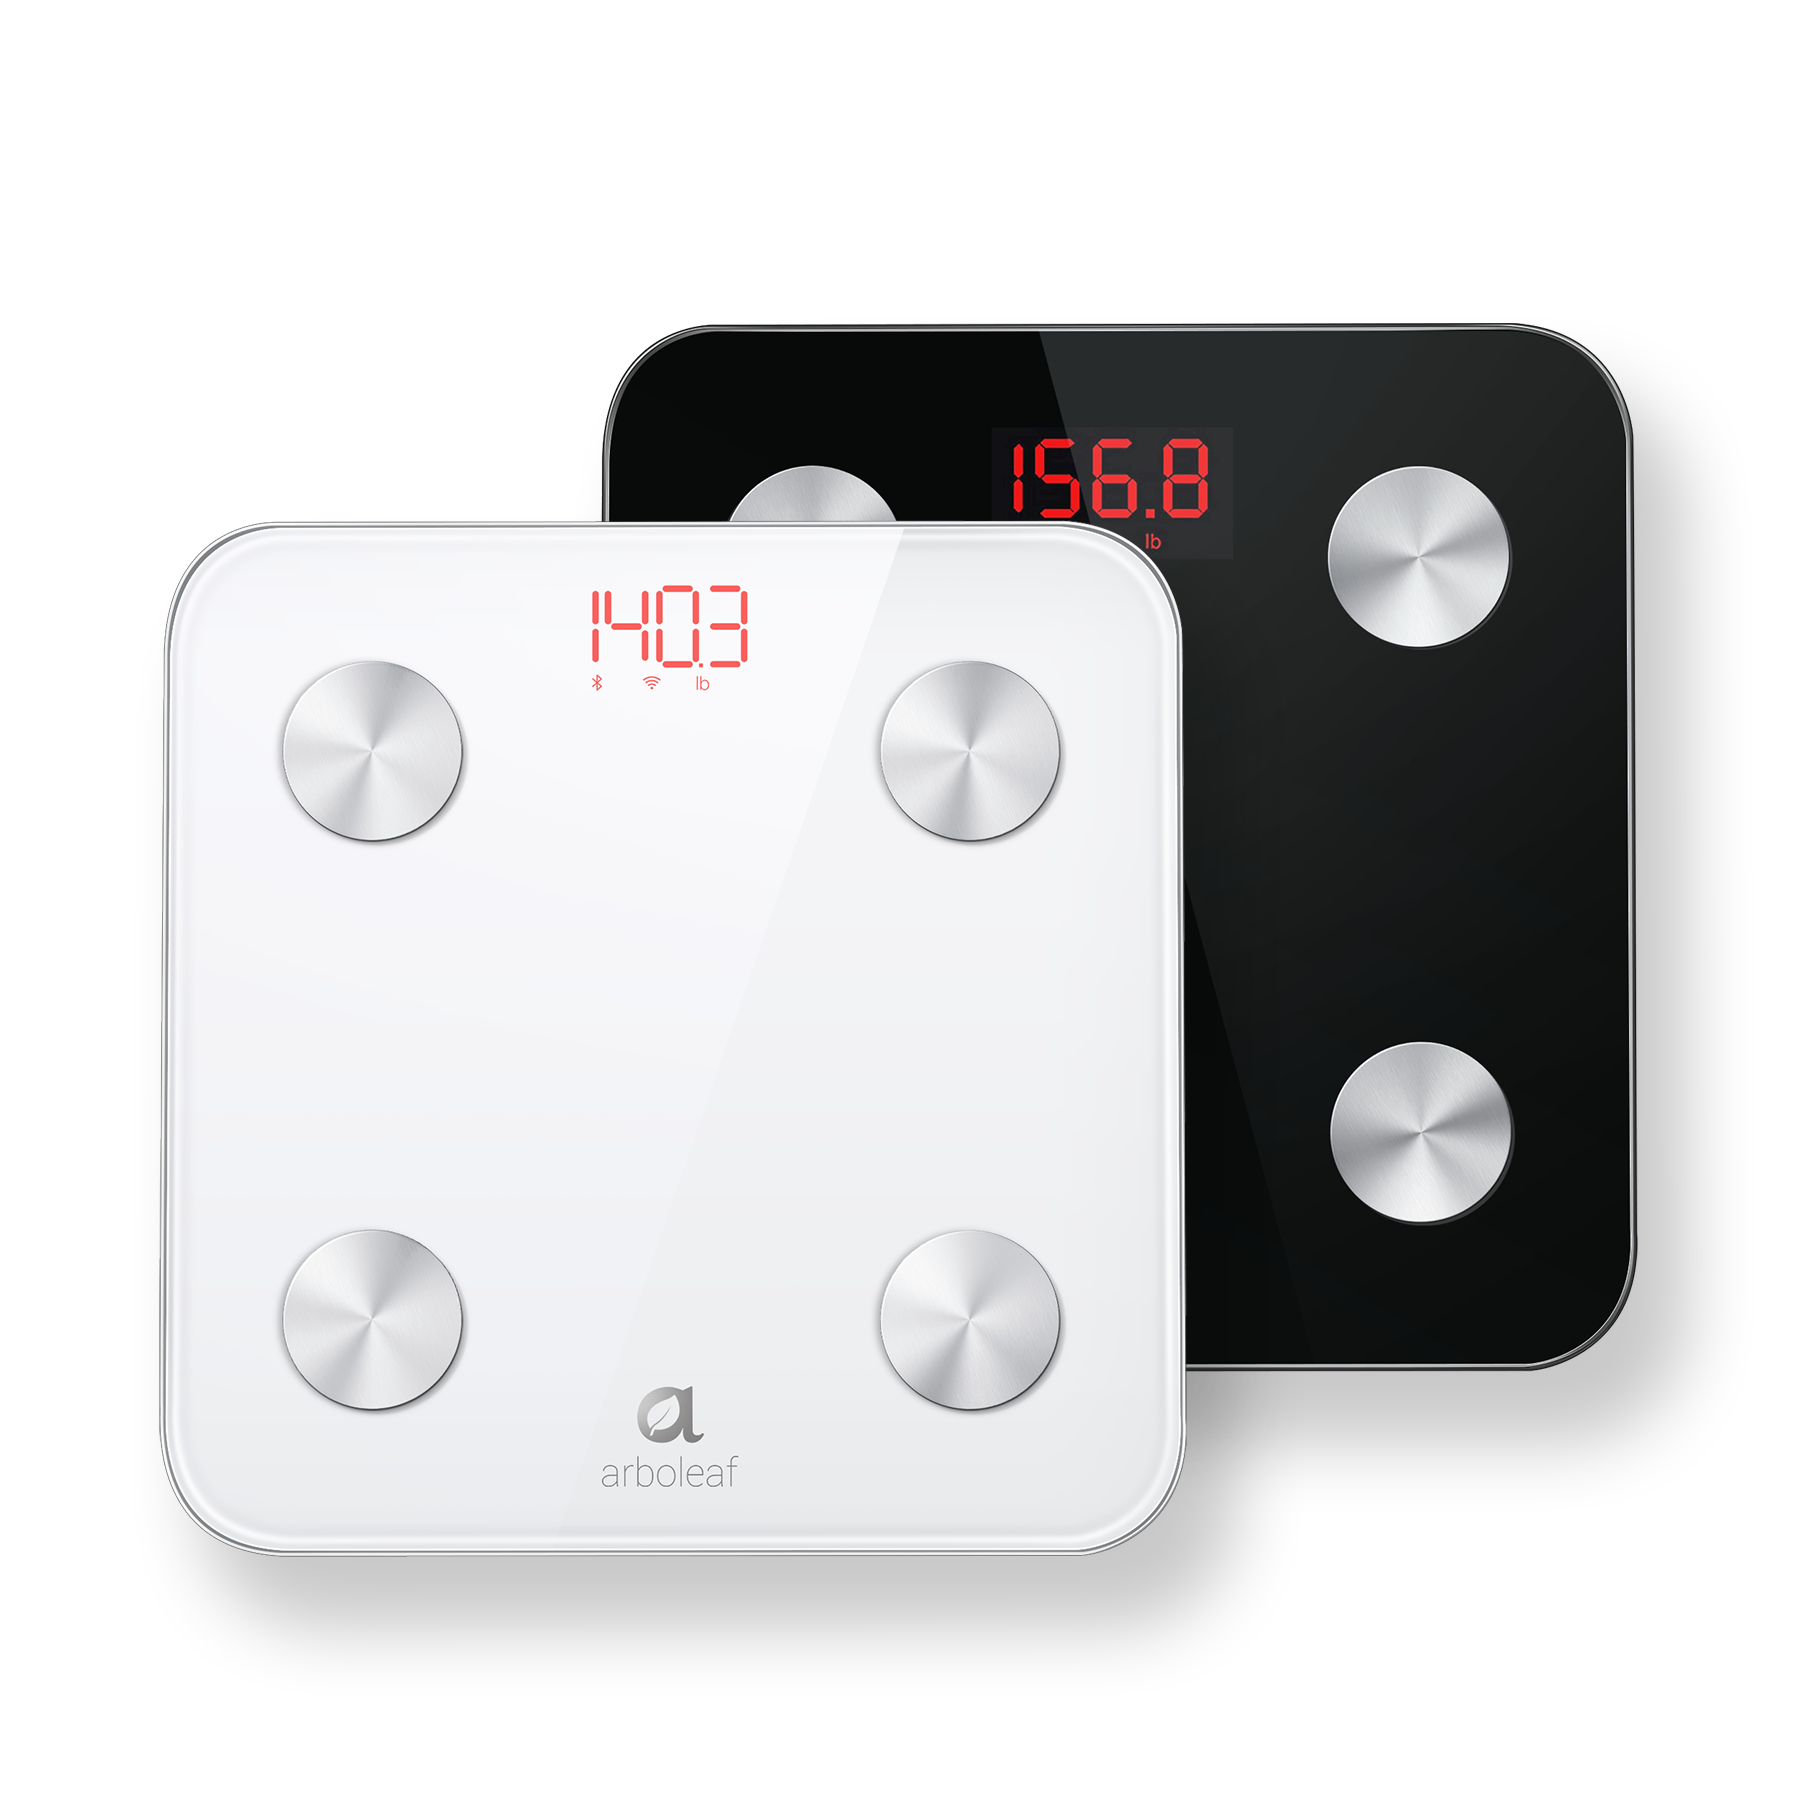 Review of the Arboleaf Smart Scale - TurboFuture